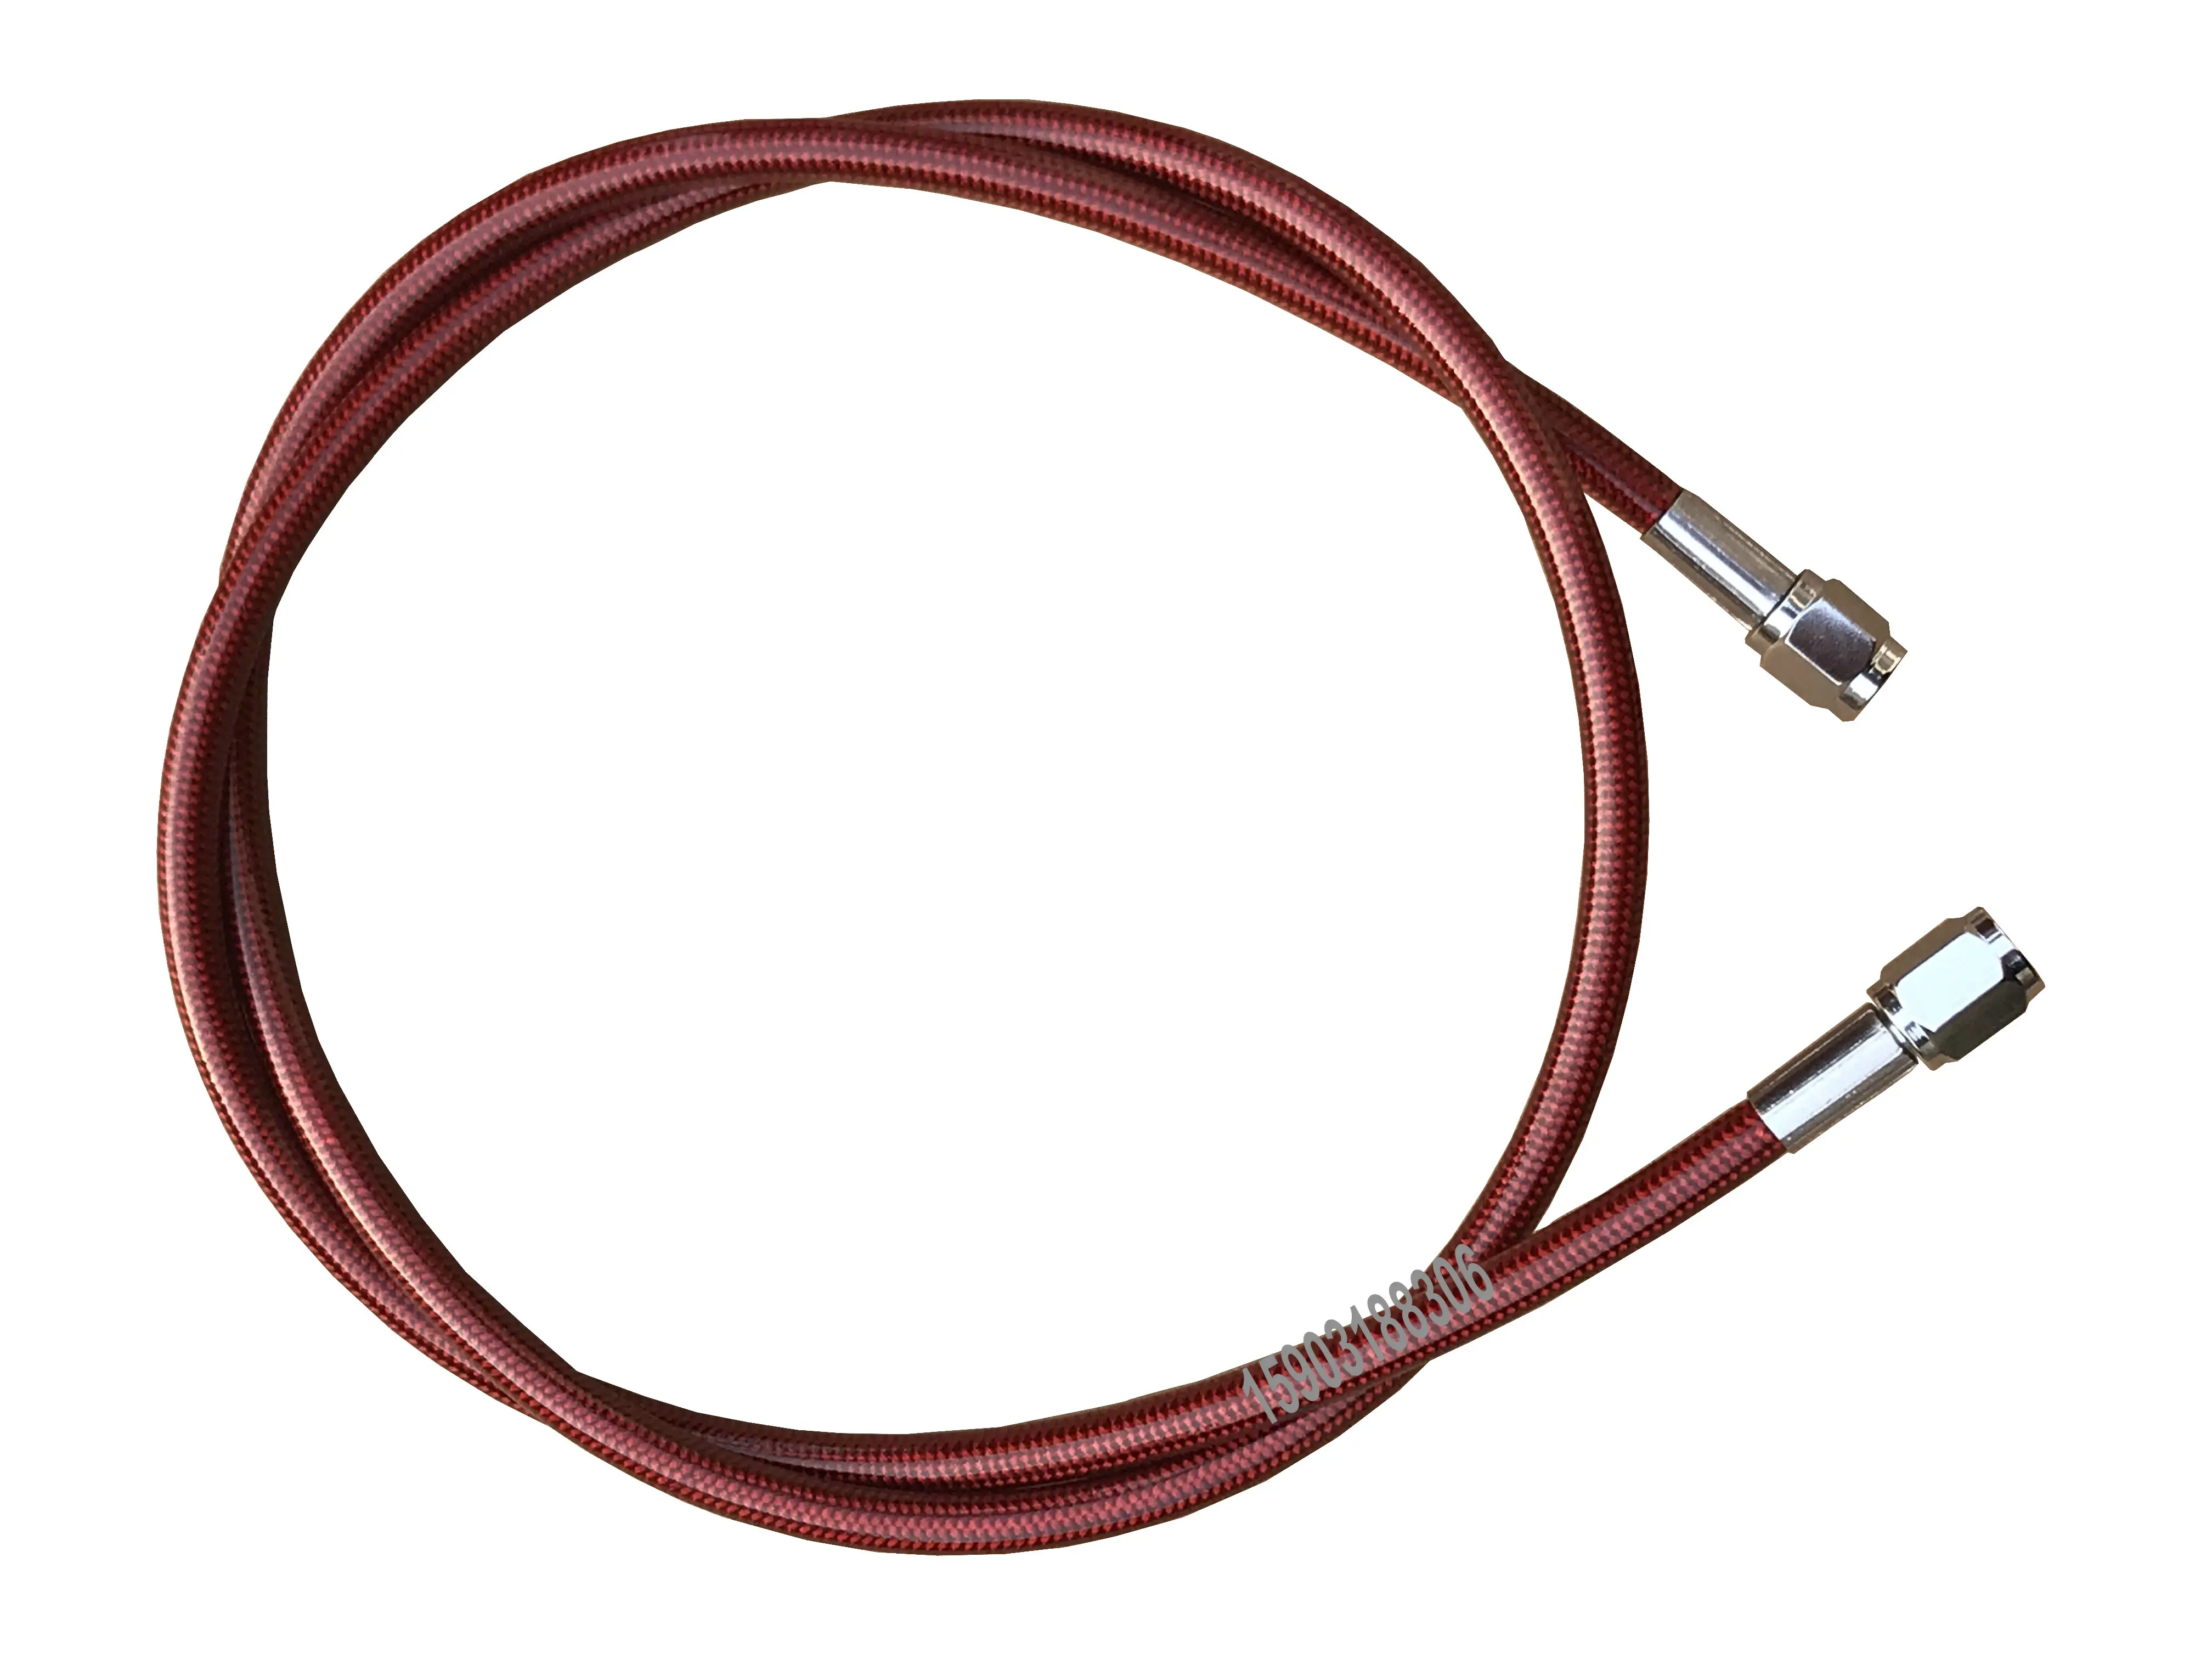 

Motorcycle performance PU Cover stainless steel braided PTFE brake hose lines with an3 crimped swivel female fittings